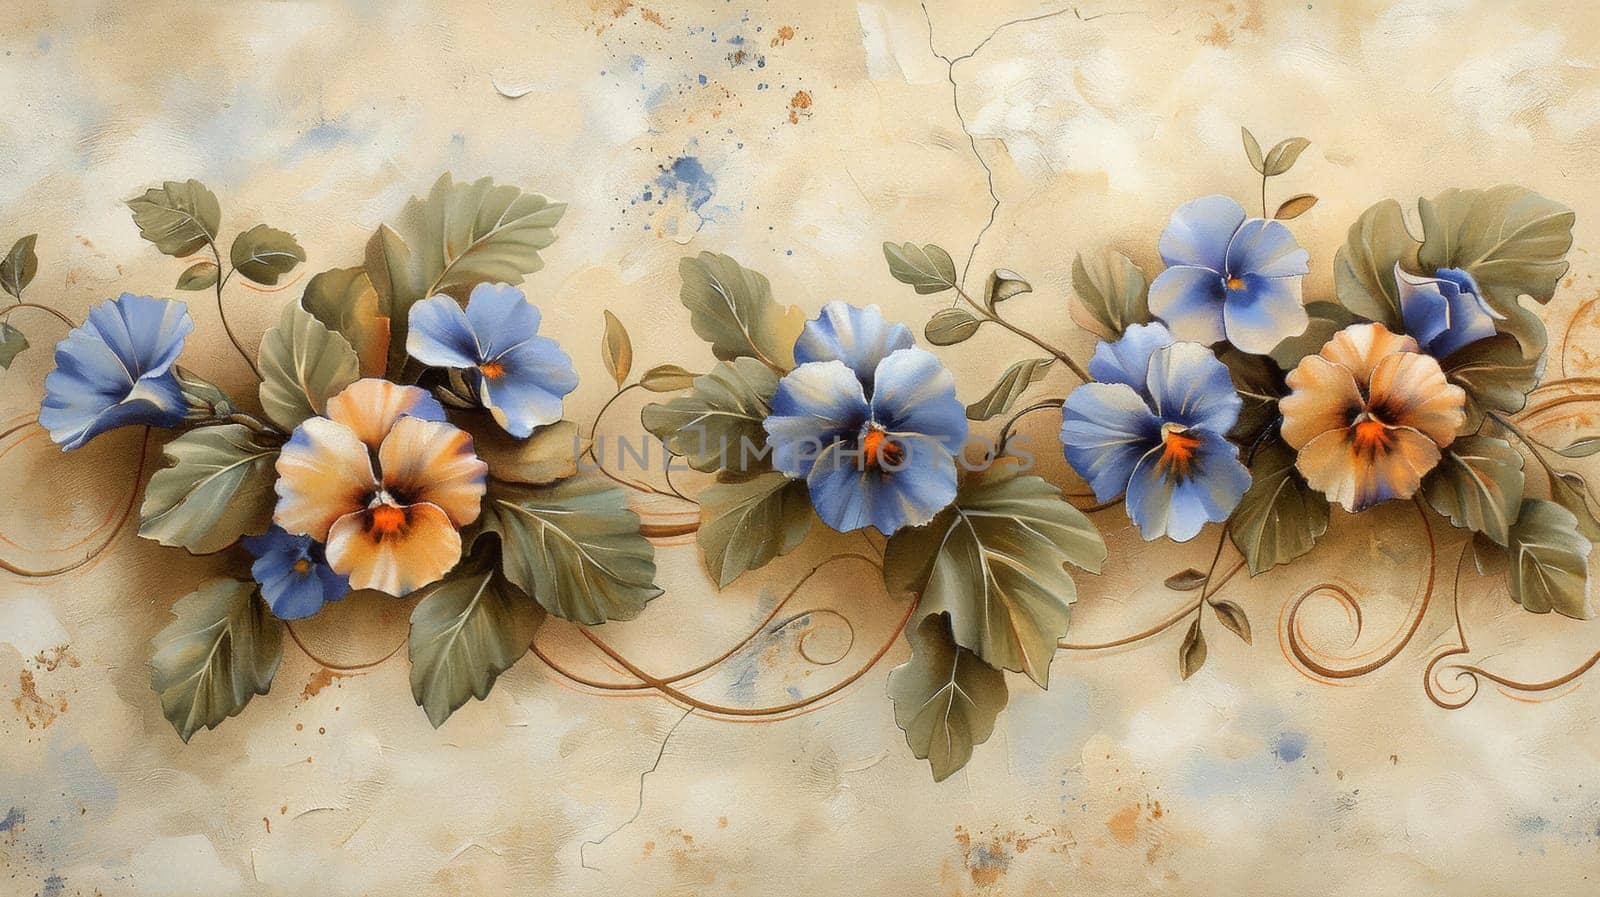 A painting of a flower arrangement on the wall with leaves